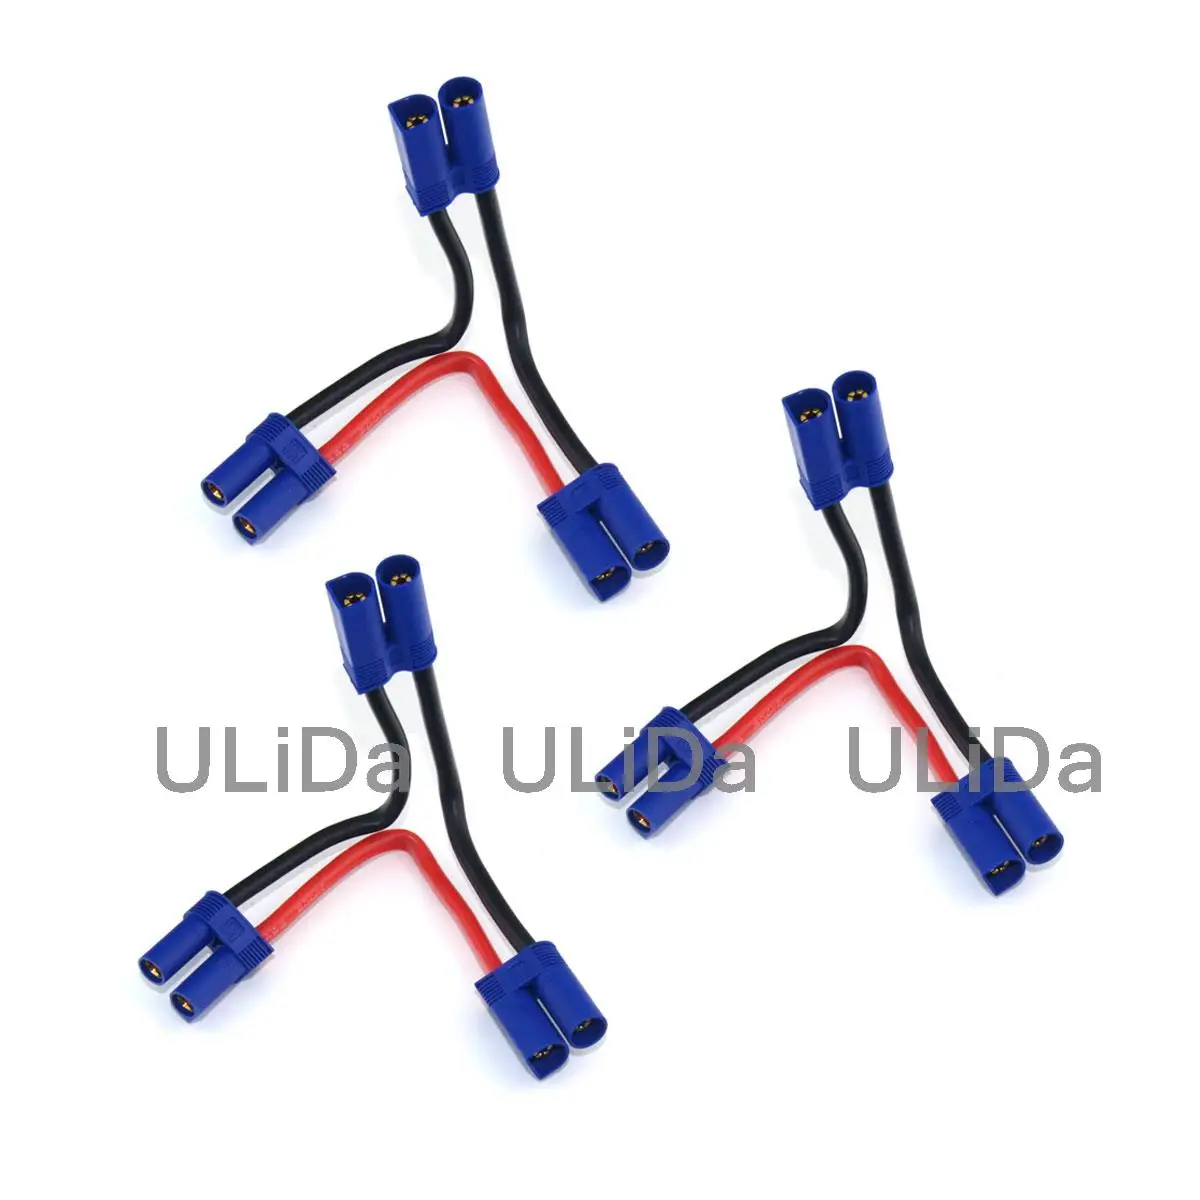 

3x New EC5 Serial Series Lipo Battery Connect Adapter Ultra Duty 10CM 12awg for RC